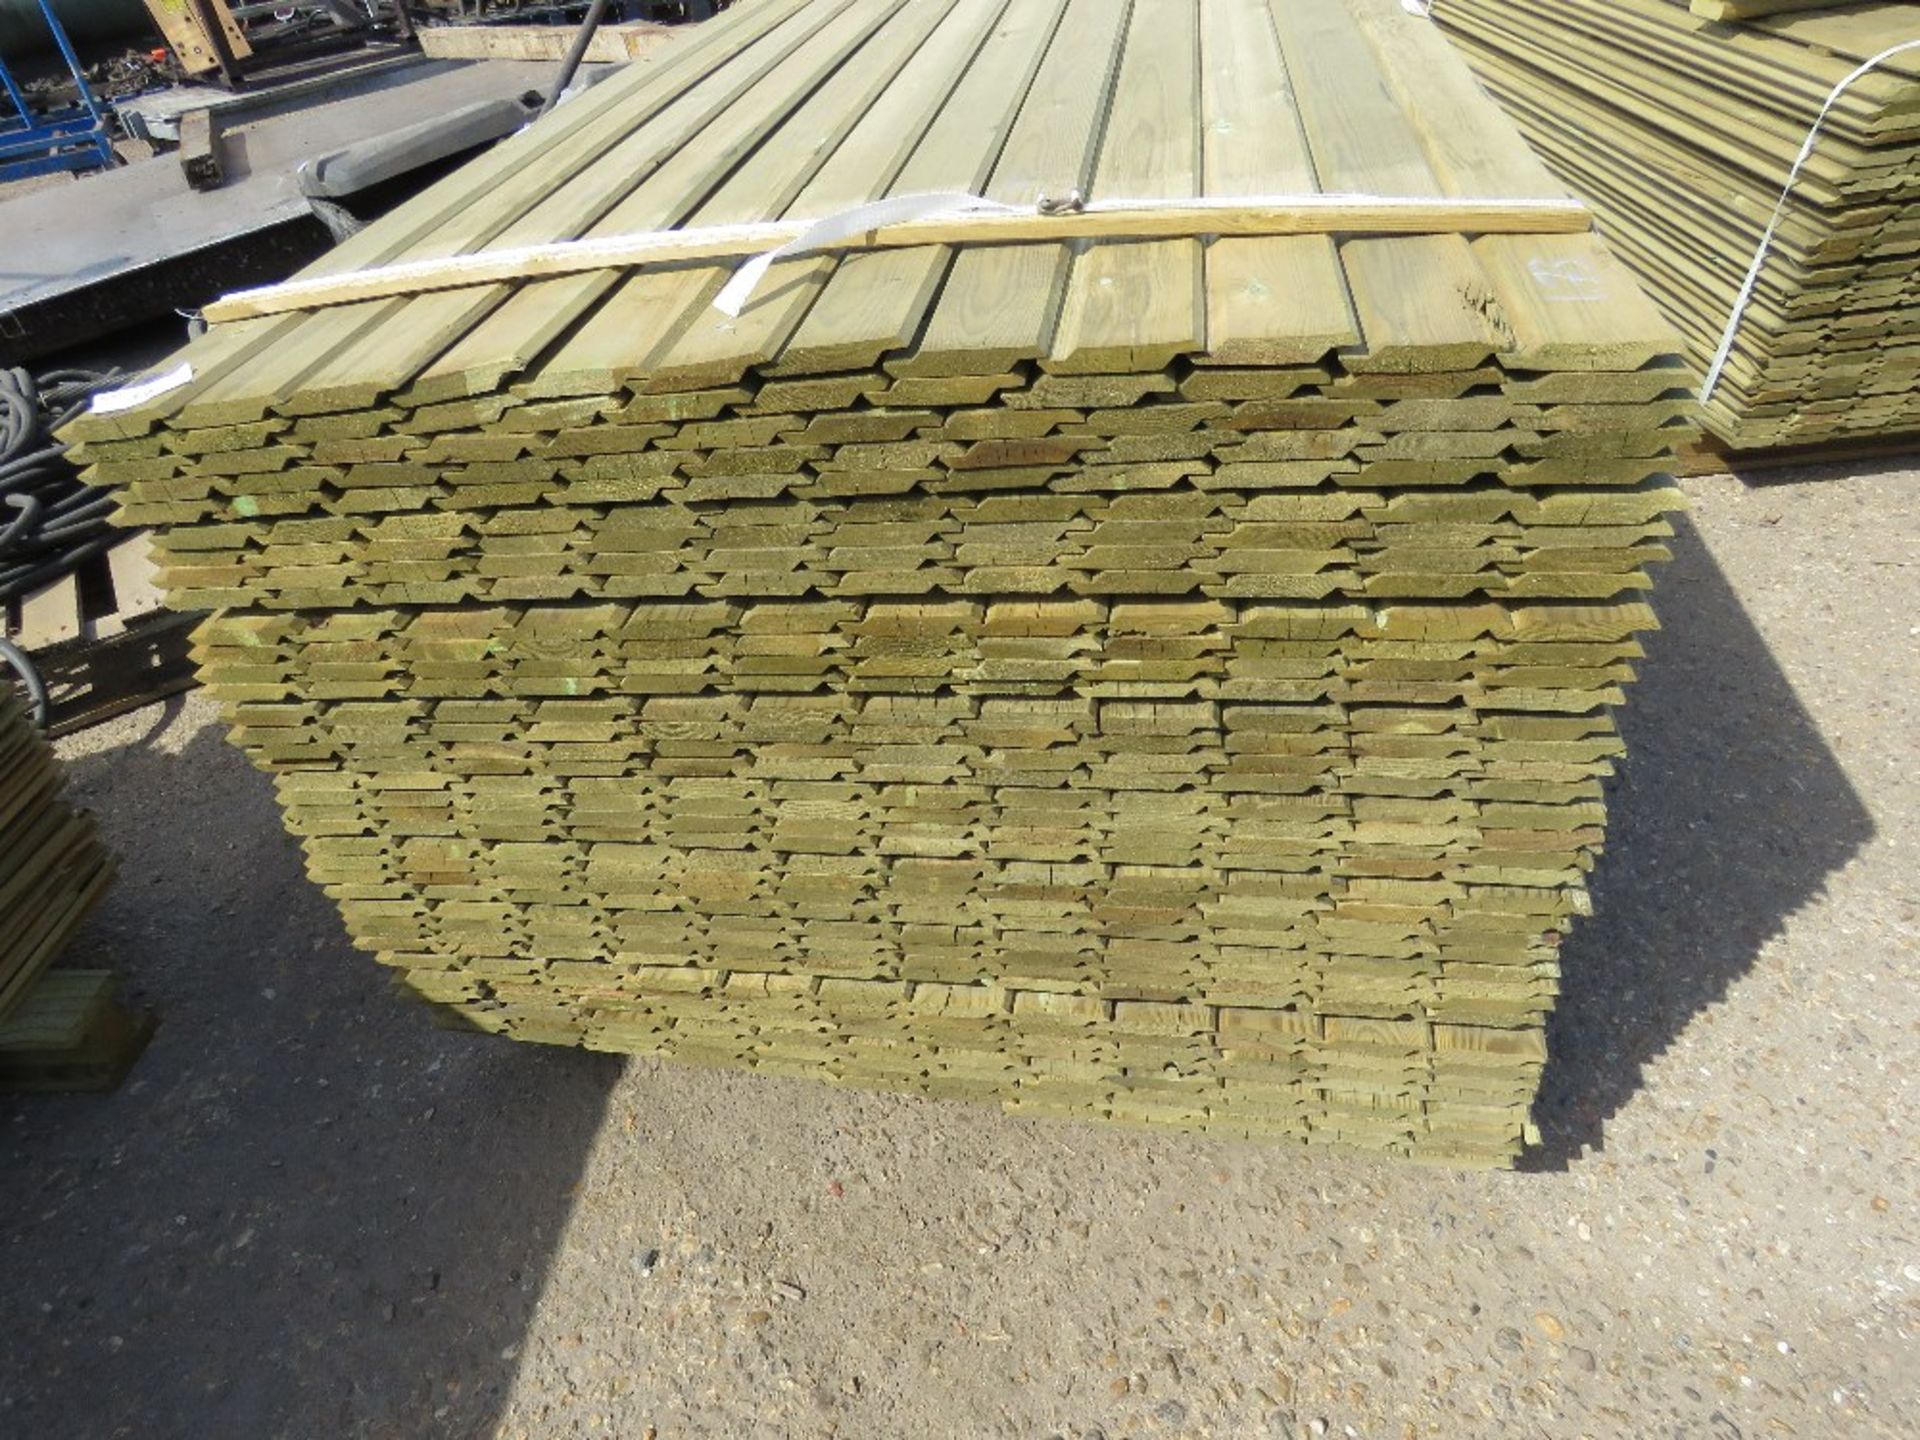 1 X PACK OF SHIPLAP TIMBER FENCE CLADDING, 1.73M X 9CM WIDE X 1.5CM DEEP APPROX - Image 2 of 3